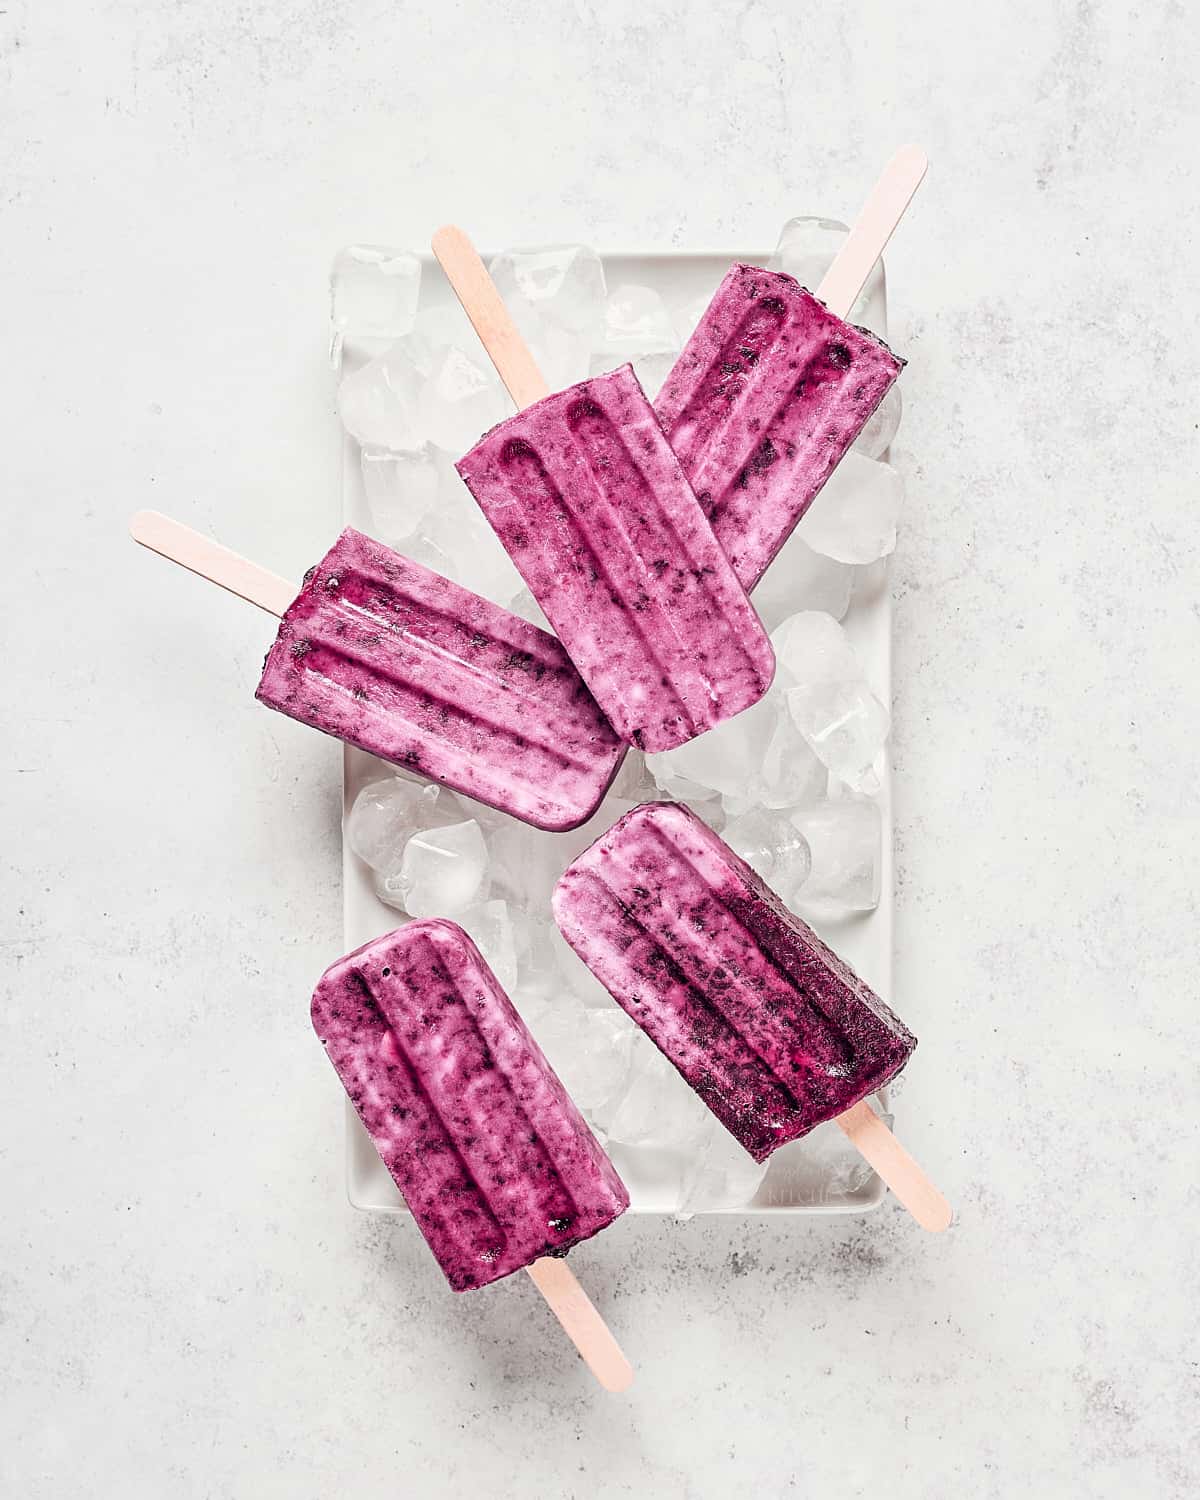 Overhead view of cherry coconut popsicles on ice on white tray on grey/white stone background.